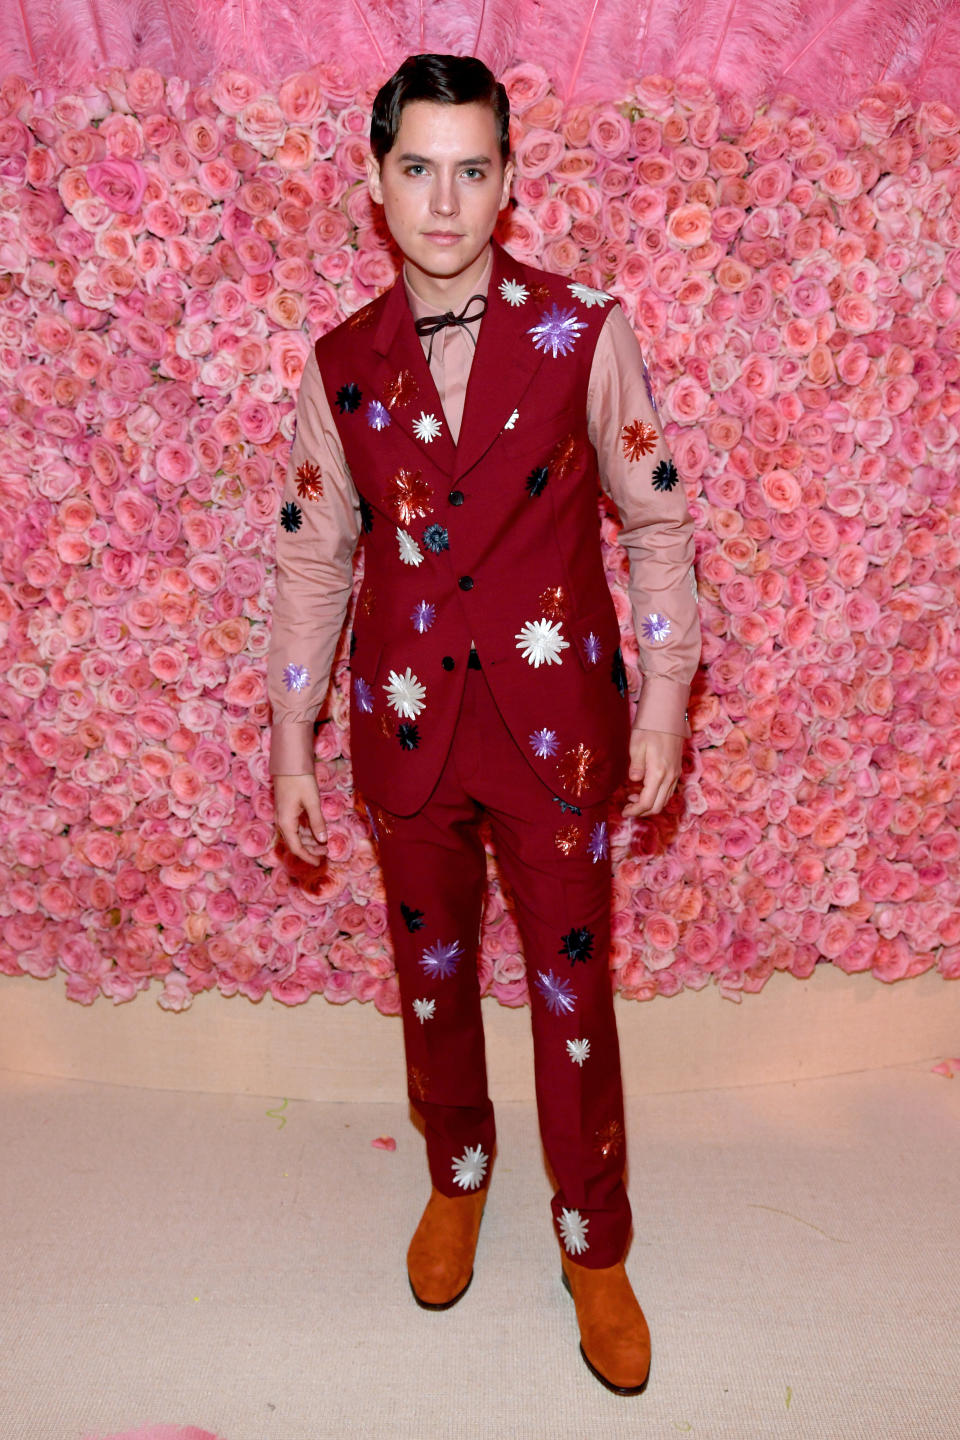 Cole Sprouse at the Met Gala.